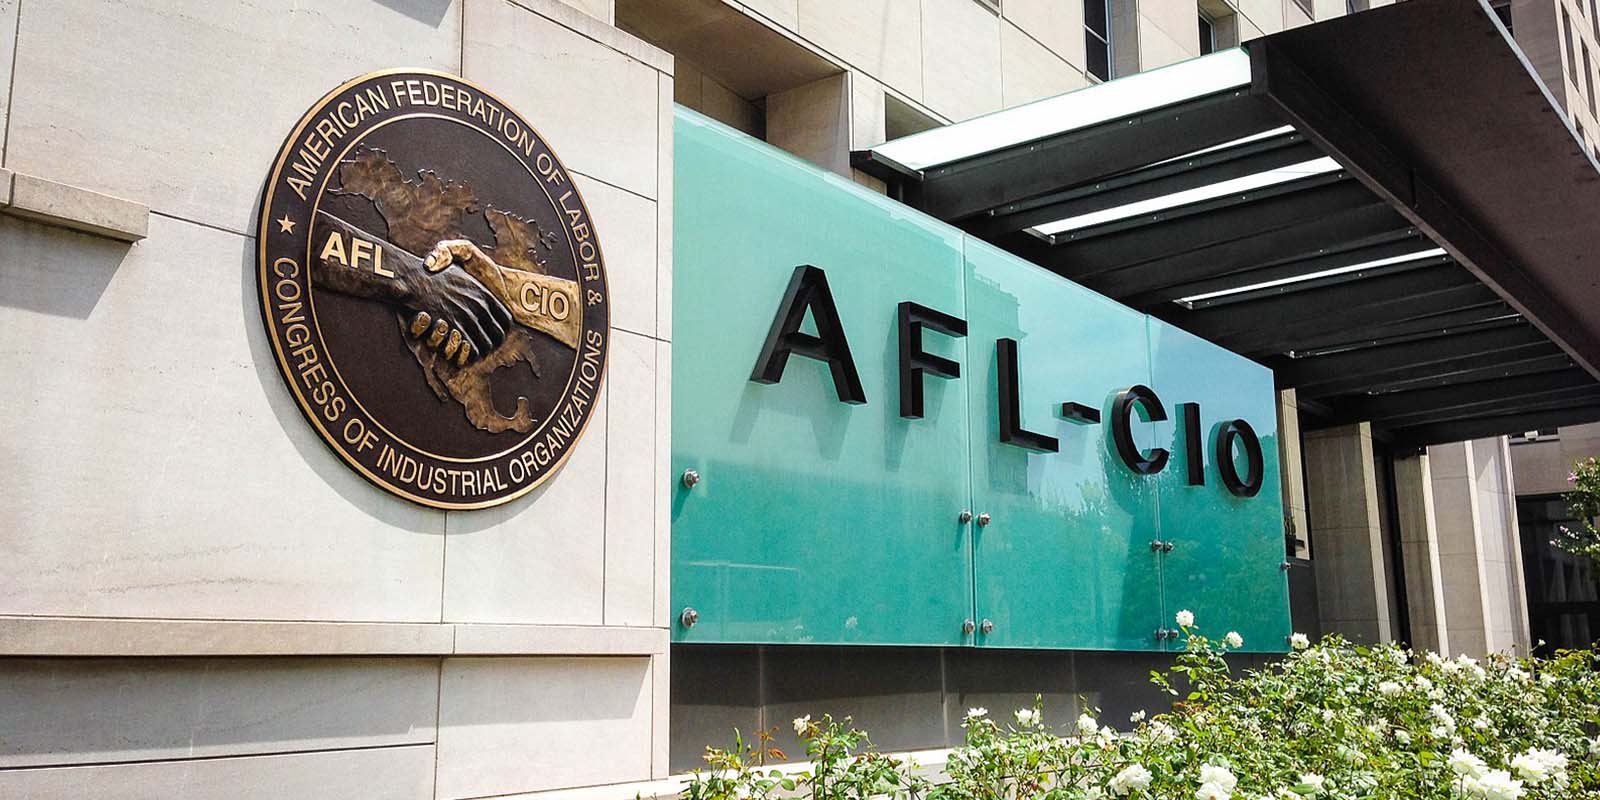 Shuler and Redmond elected at helm of AFL-CIO, ‘a historic day for the labor movement’